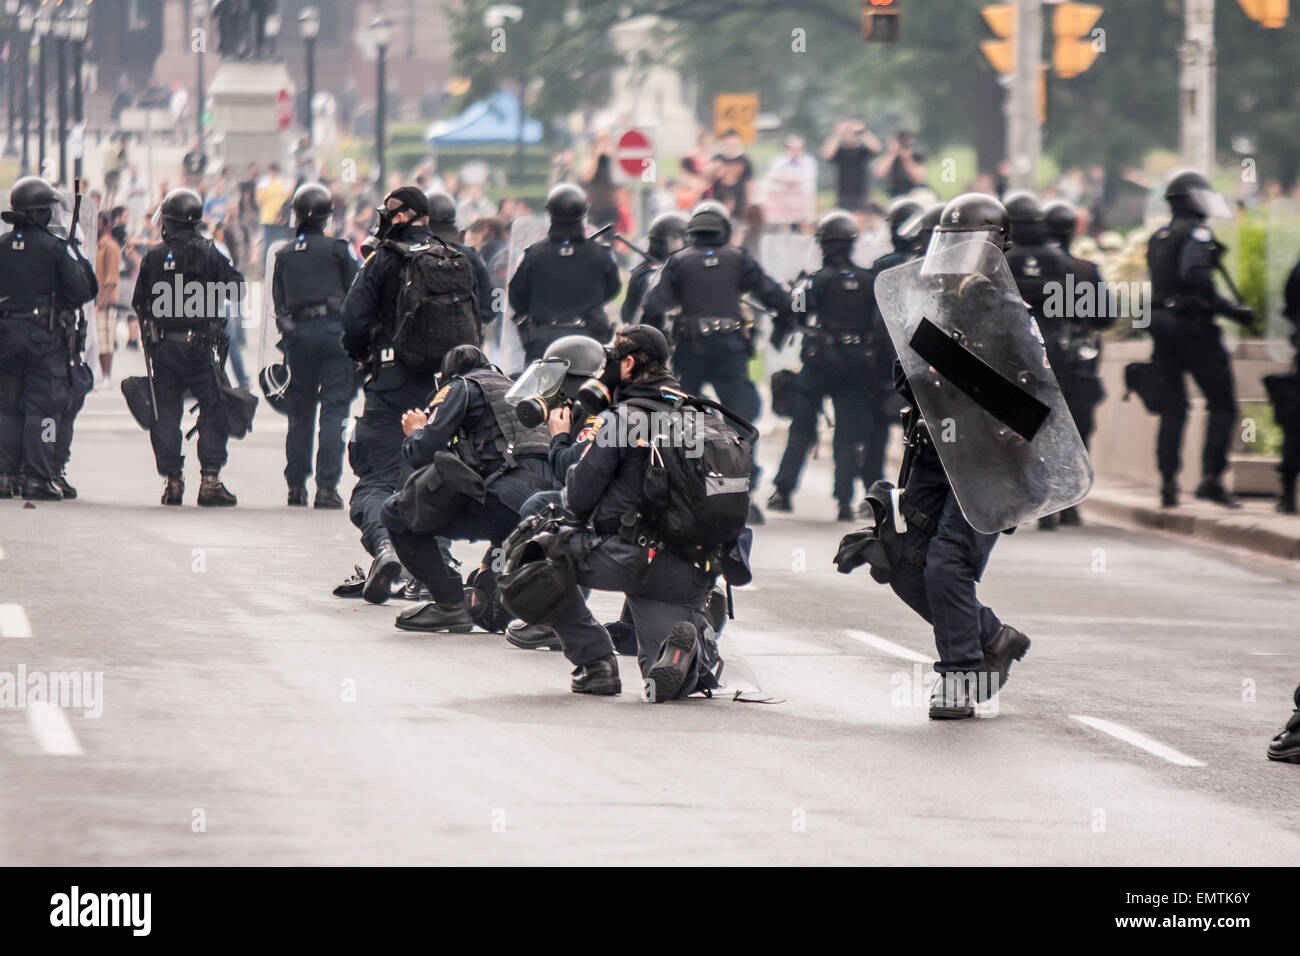 June 26, 2010 - Toronto, Canada. Protesters clash with riot police ...